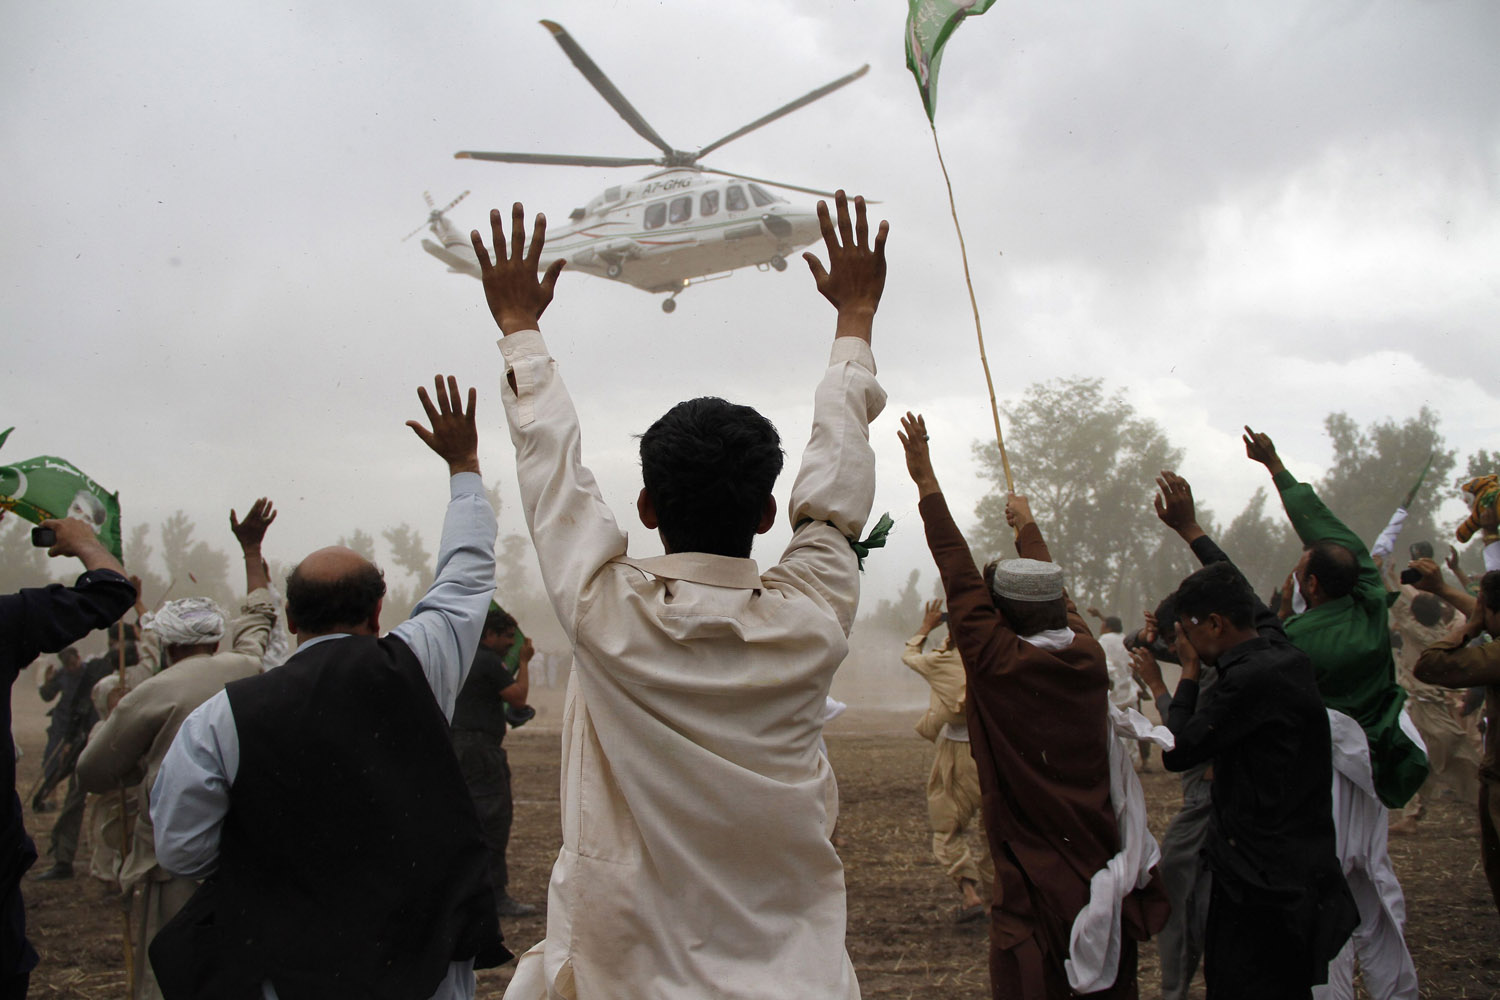 Supporters wave towards a helicopter transporting Sharif, leader of political party PML-N, as he leaves after his election campaign rally in Peshawar